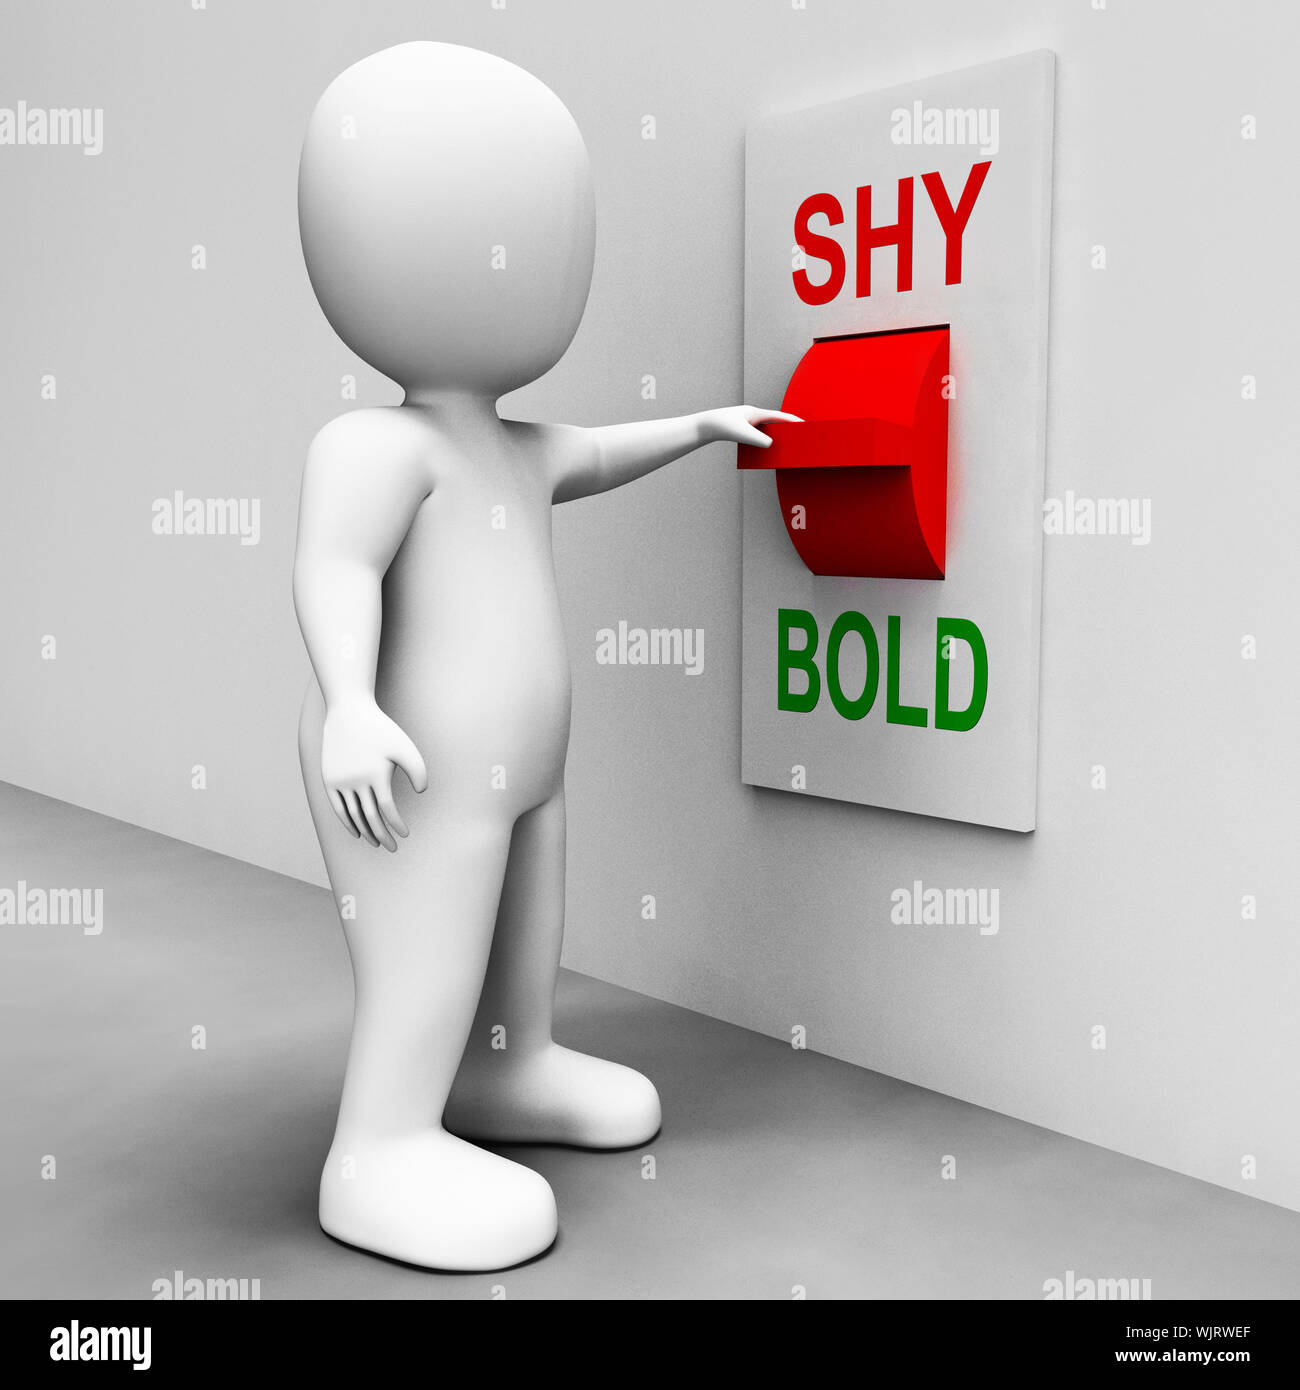 Shy Bold Switch Meaning Choose Fear Or Courage Stock Photo - Alamy